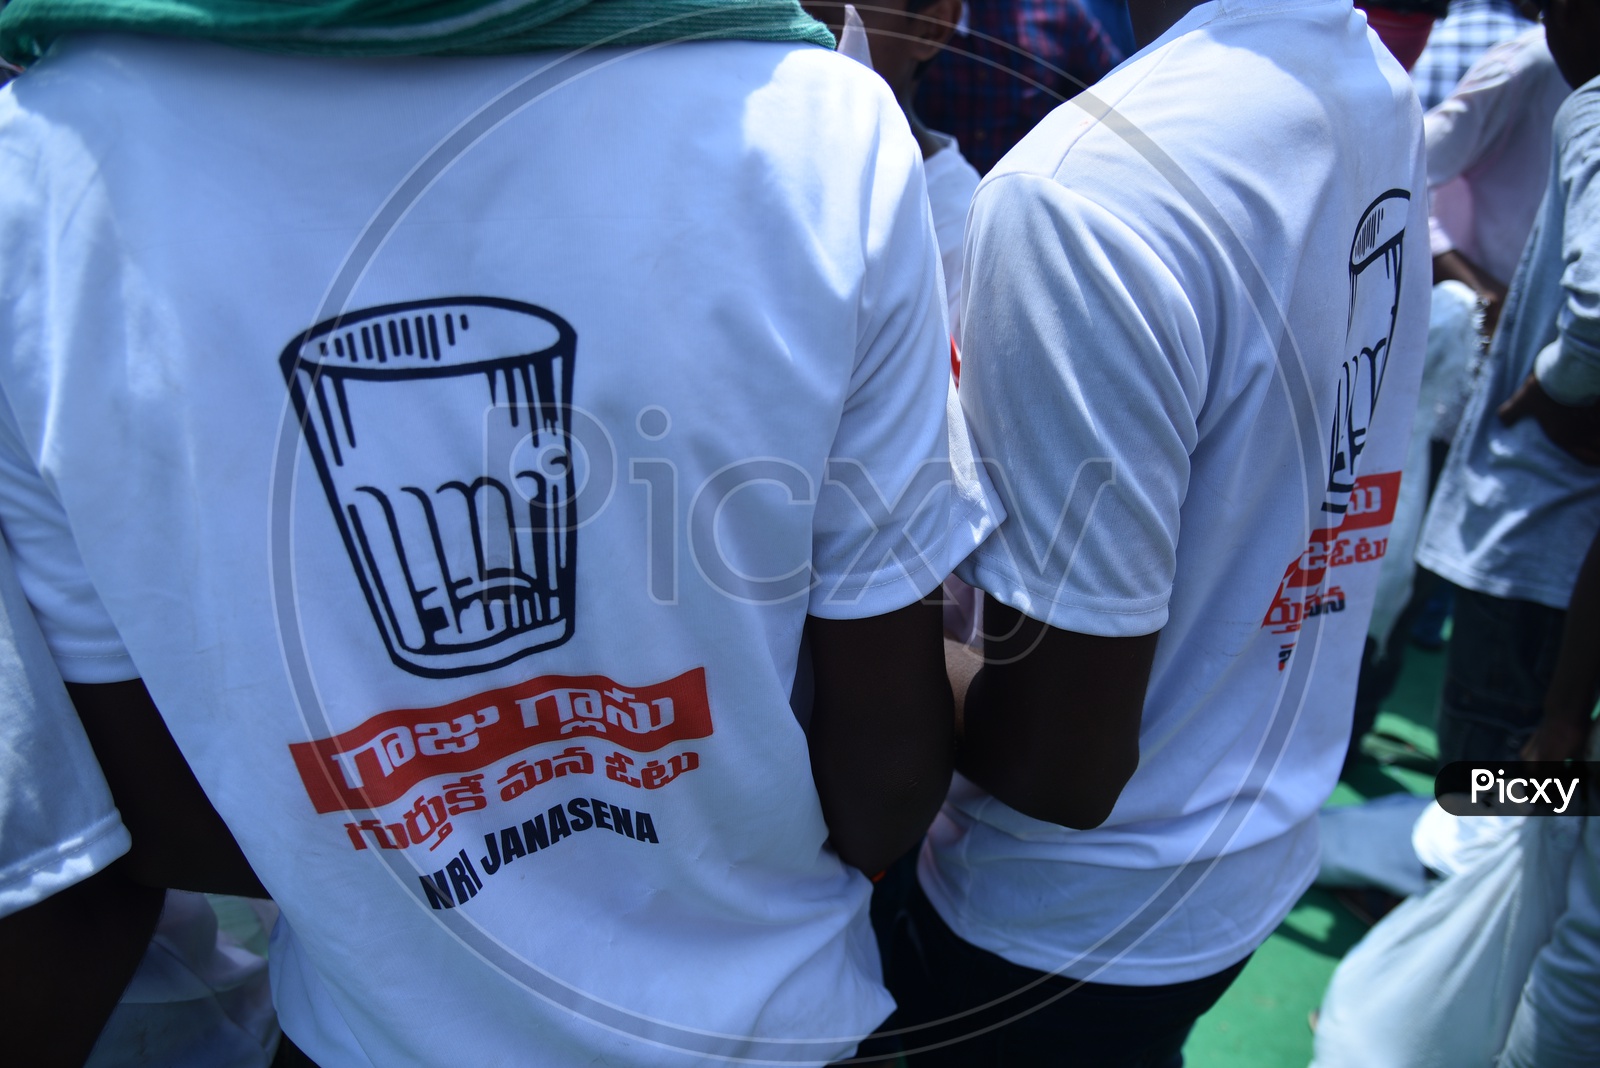 Jana sena party supporters wearing party t-shirts at an election campaign